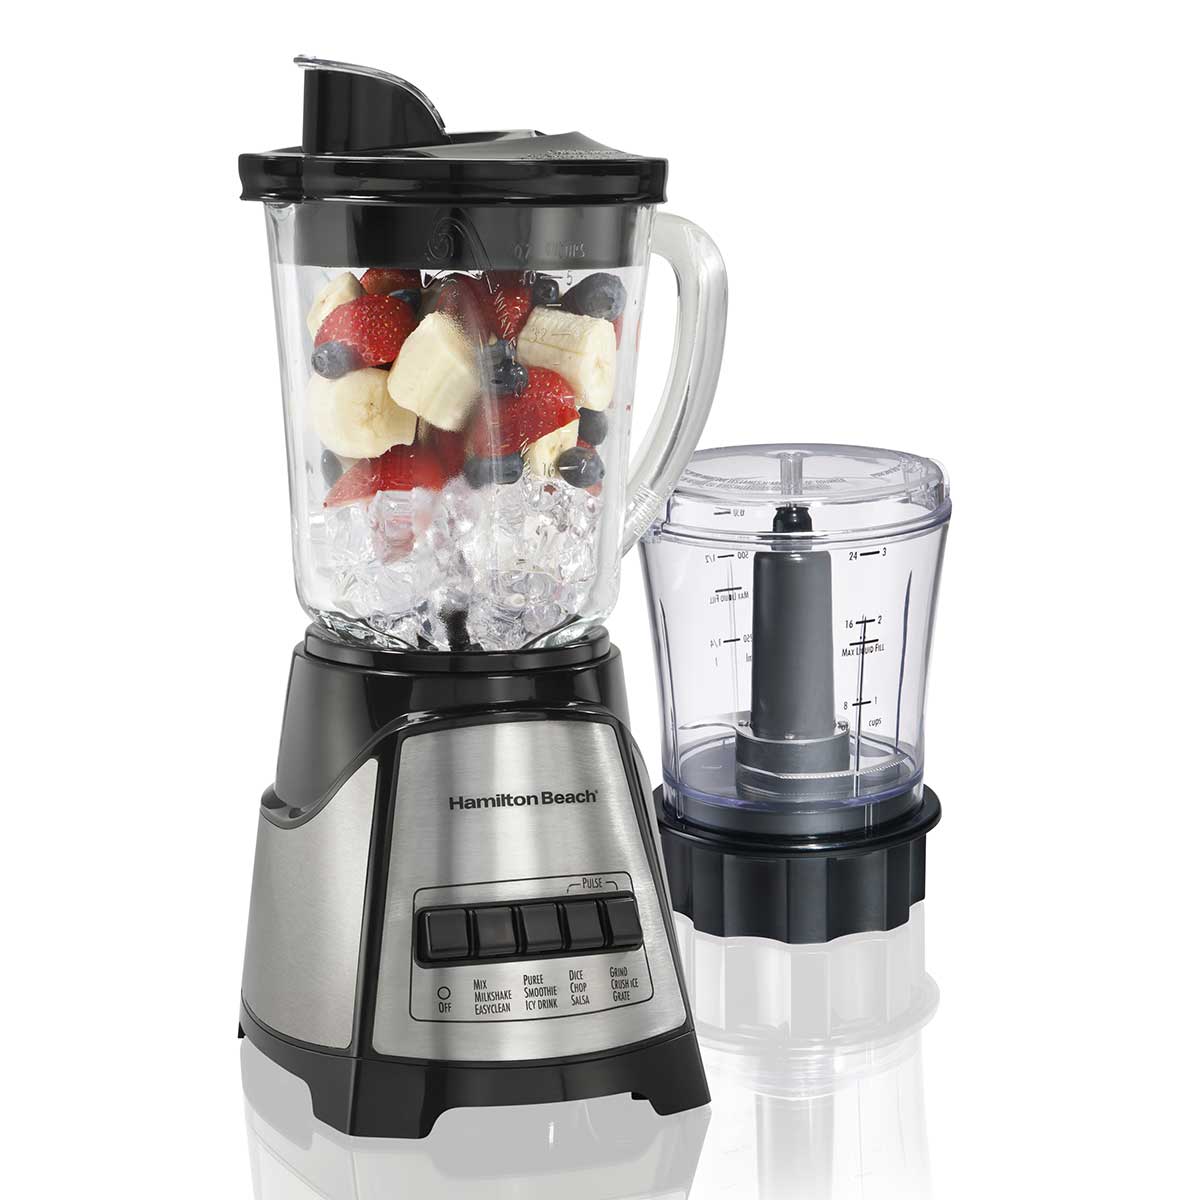 12 Function Blender & Chopper with Mess-free 40oz Glass Jar, 700W Black & Stainless (58149)